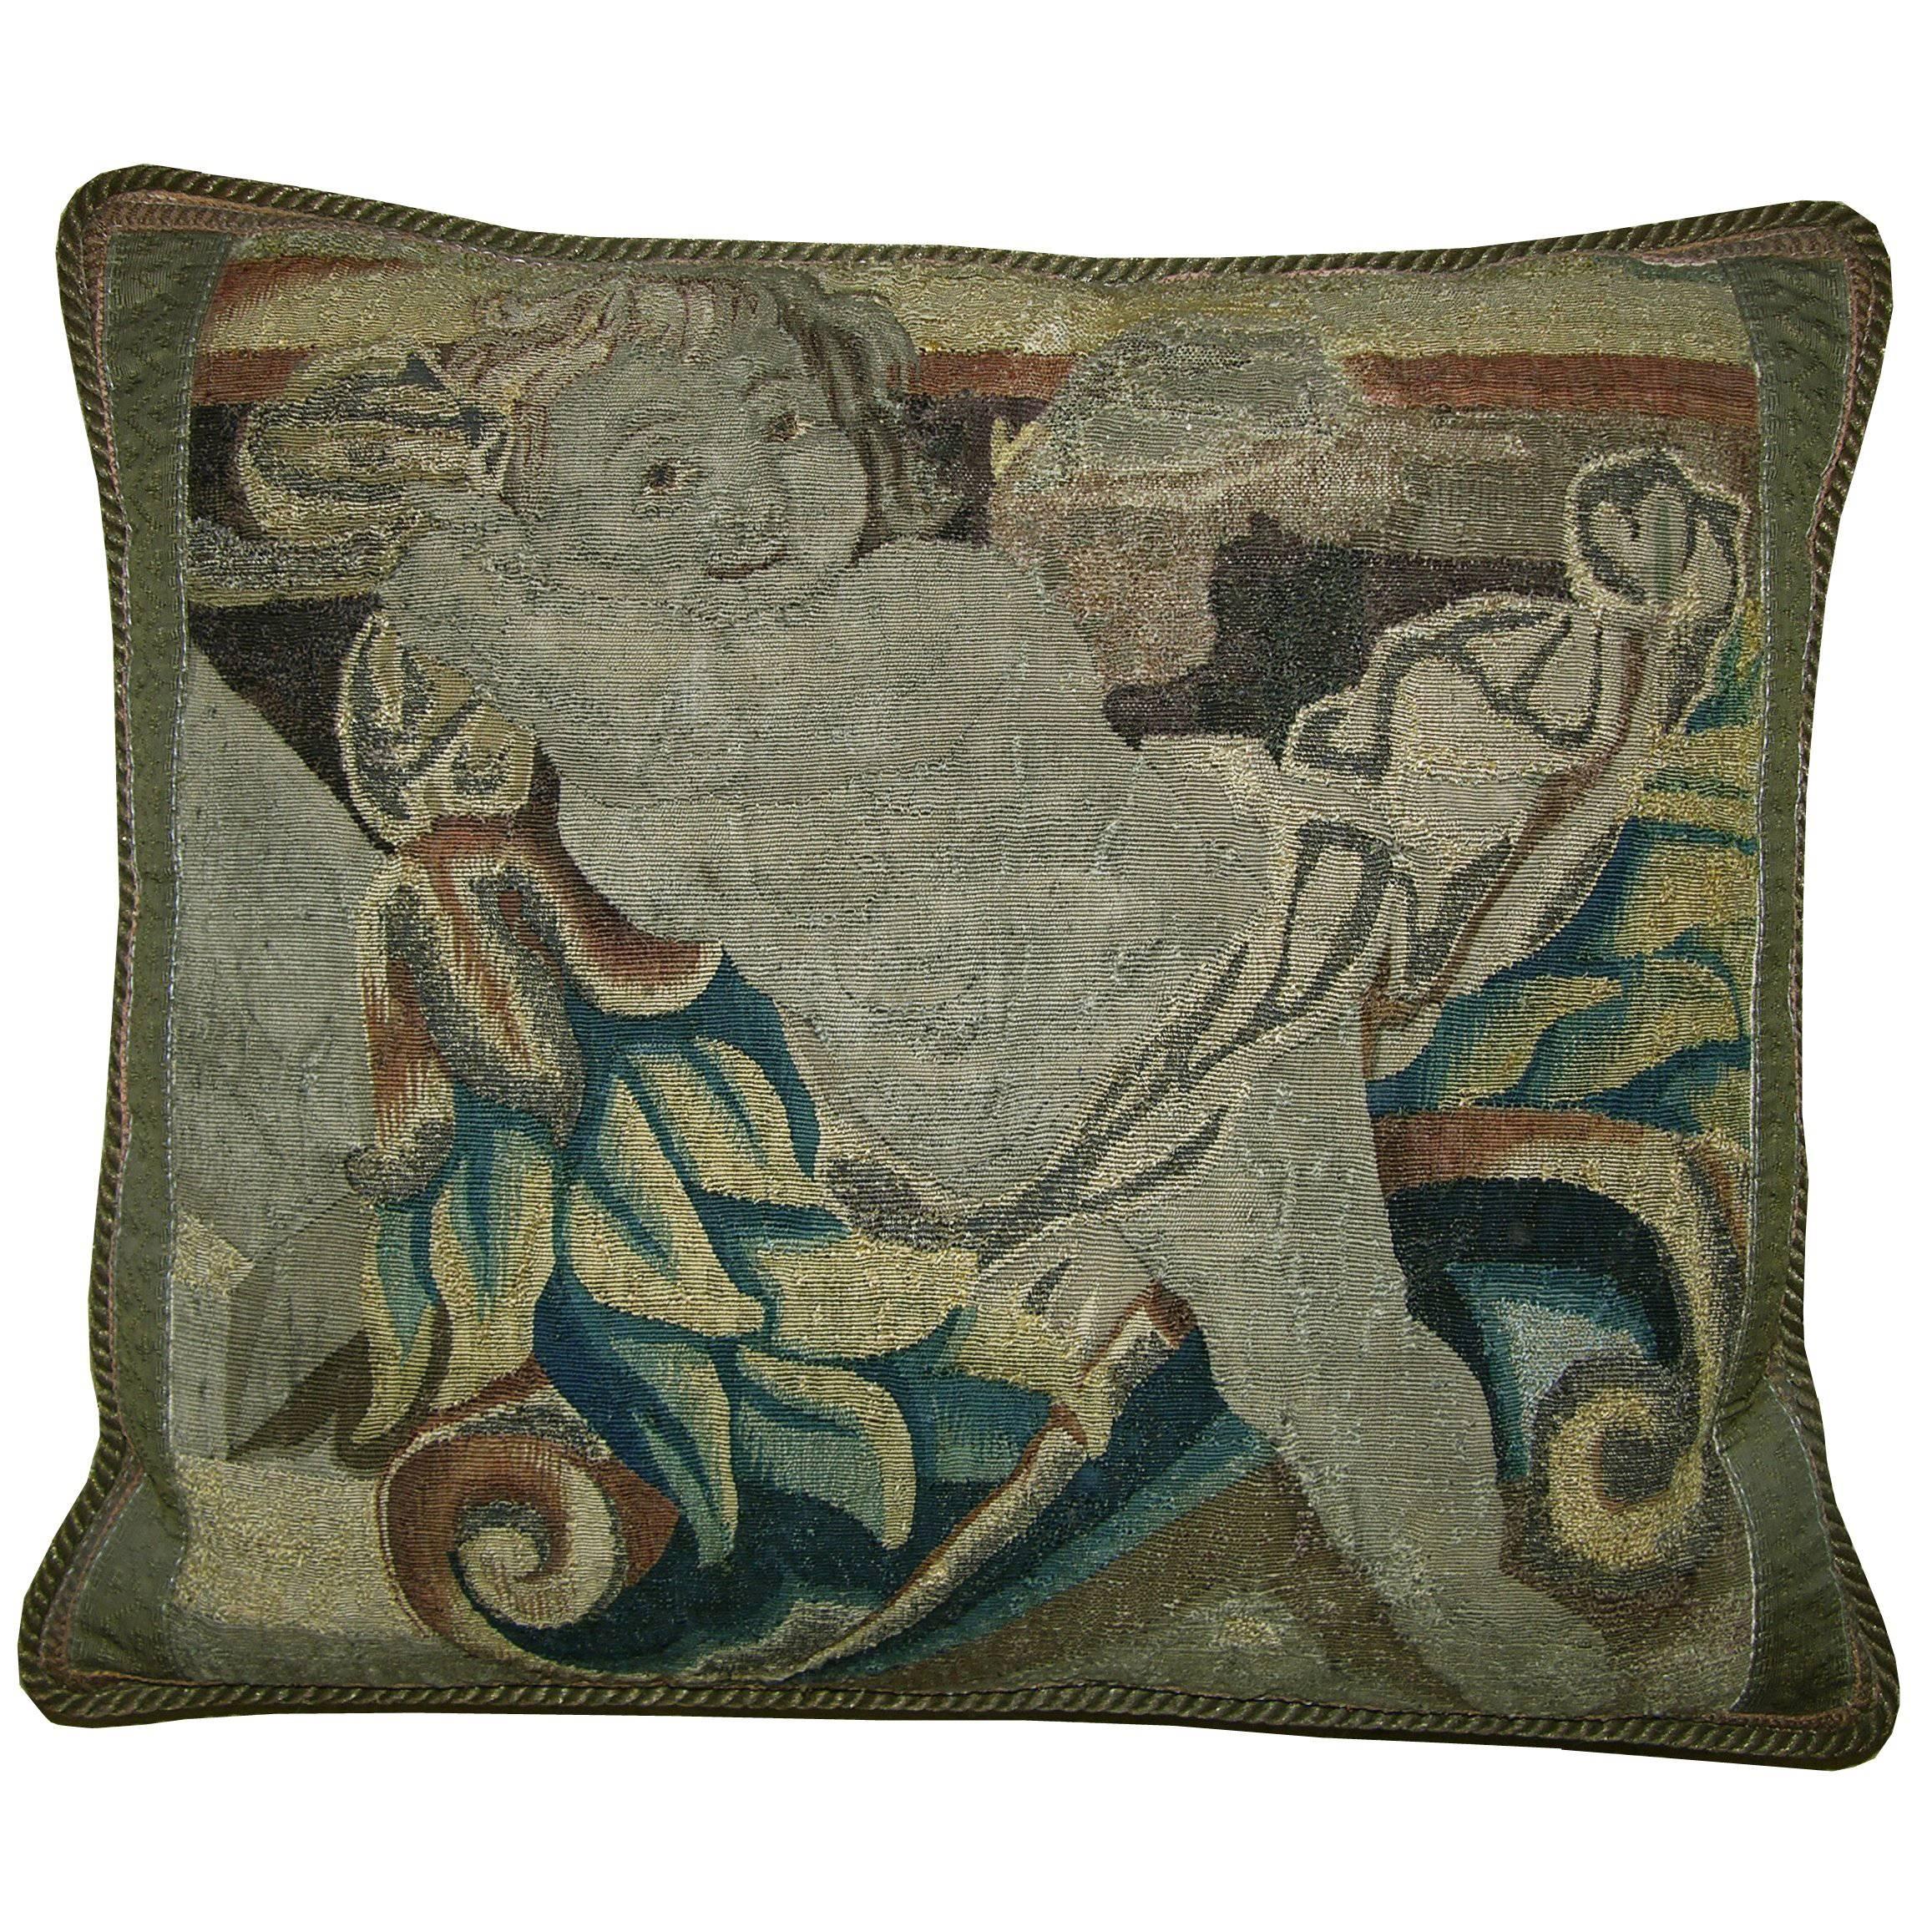 Antique Brussels Tapestry Pillow, circa 1670